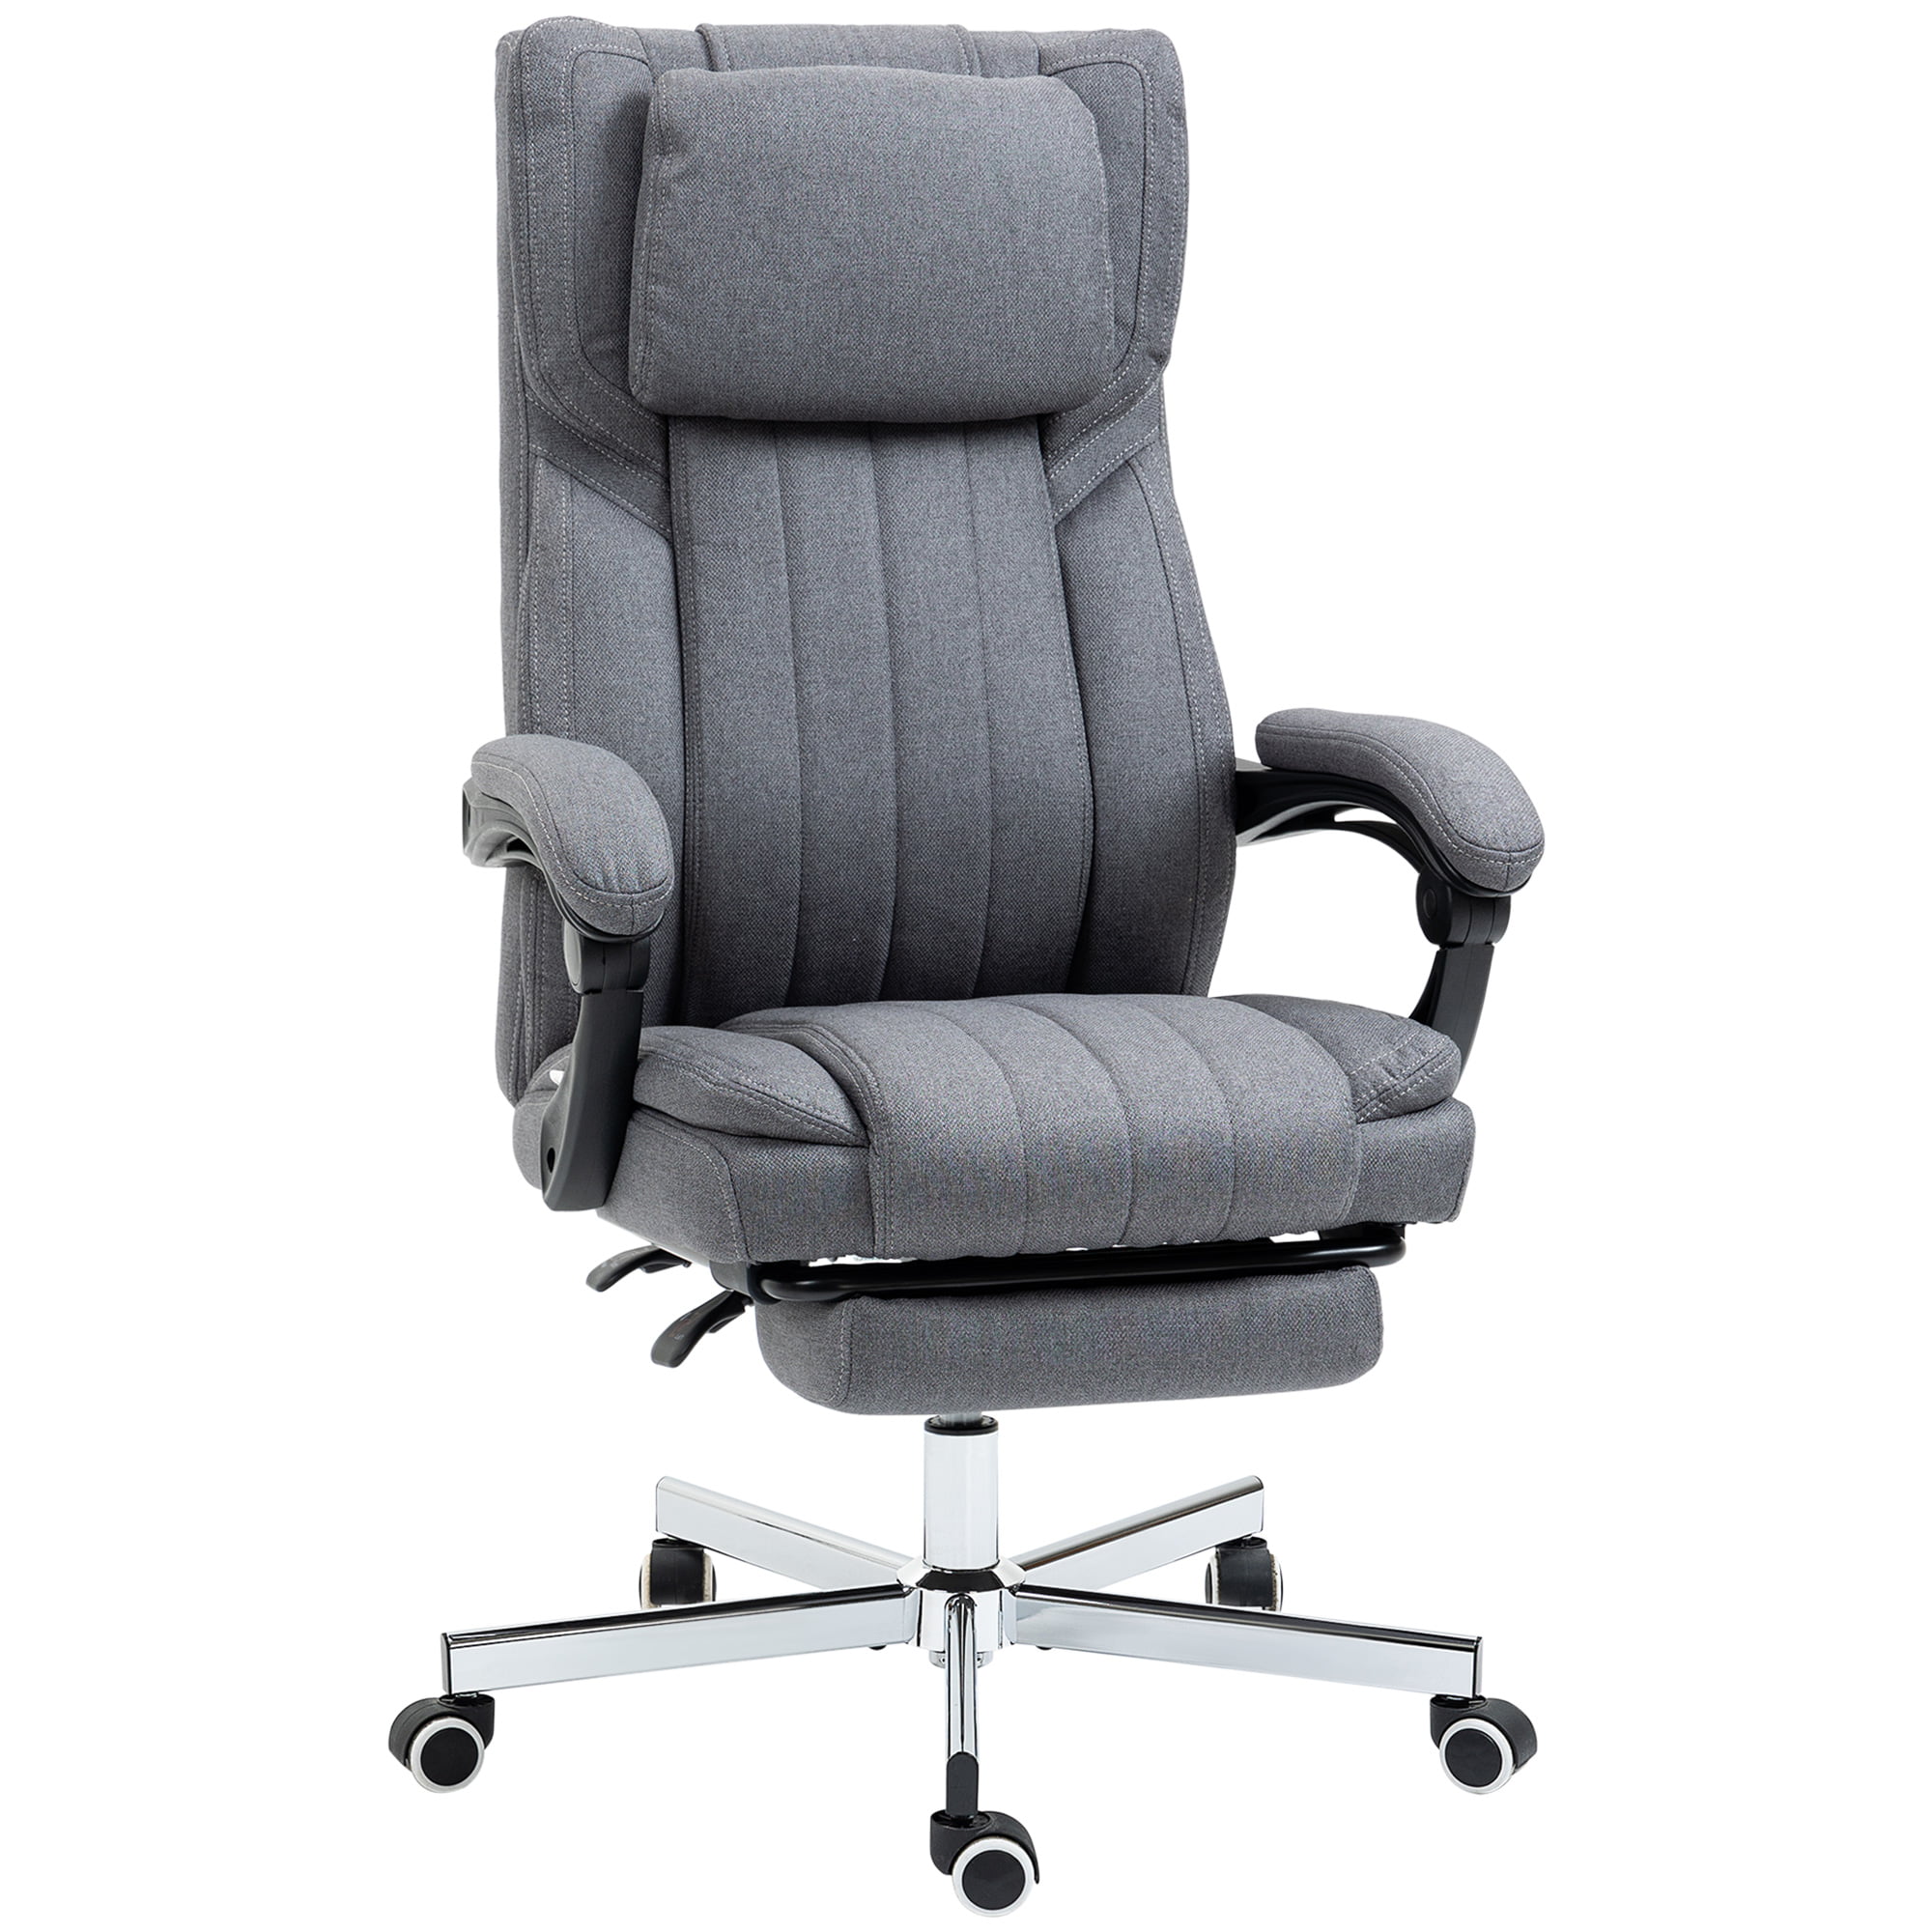 Vinsetto High-back Ergonomic Office Chair With Footrest